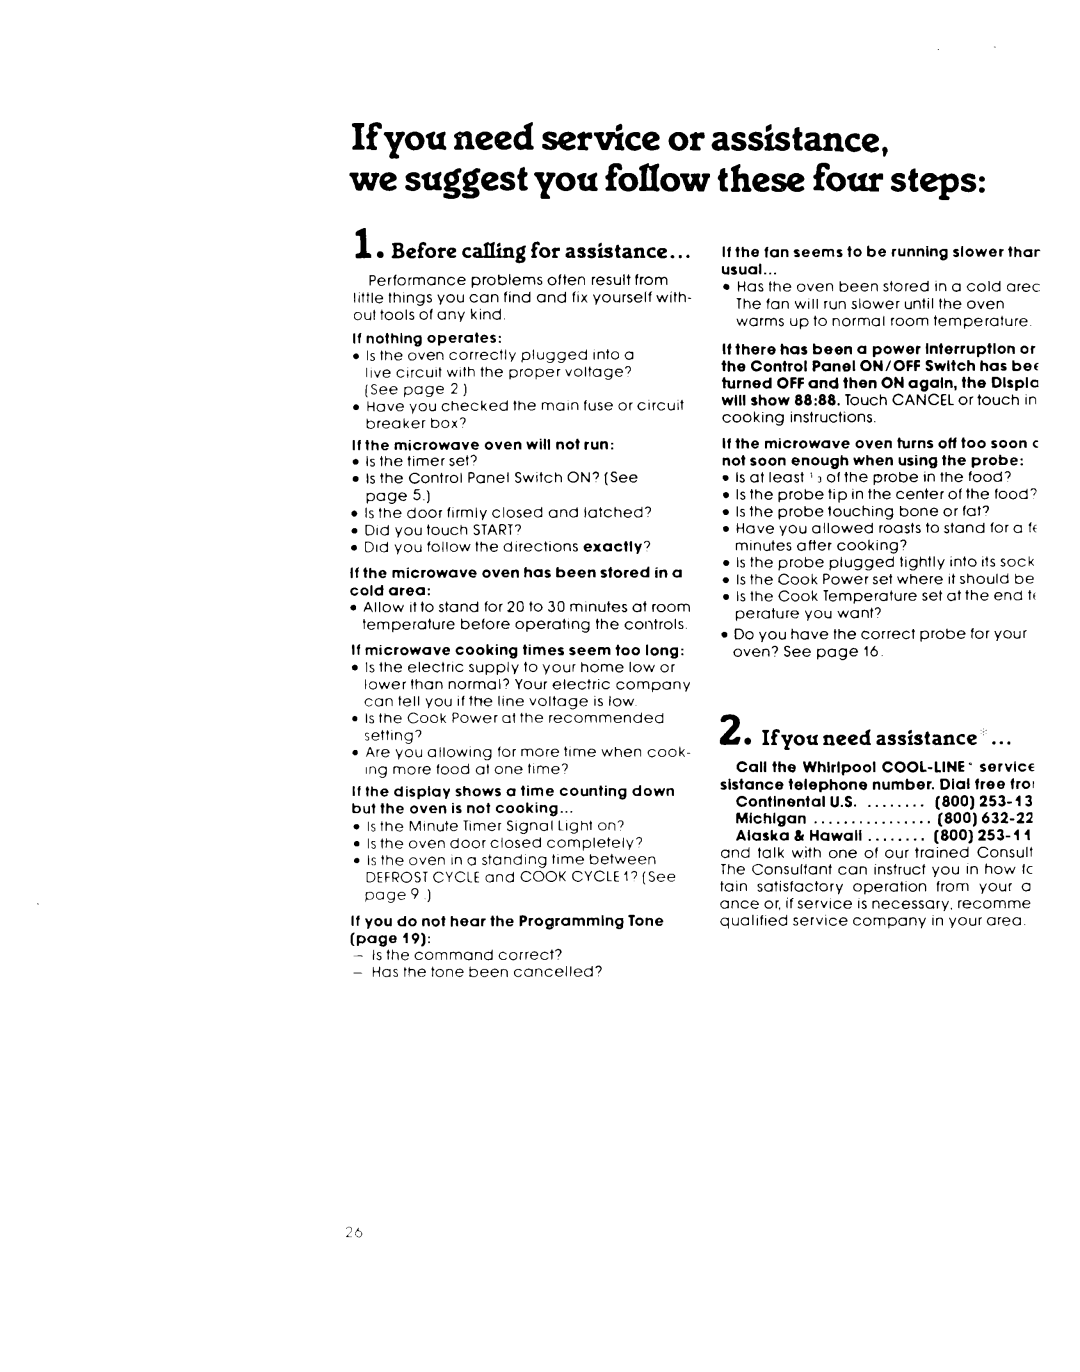 Whirlpool MW8650XL Ifyou need service or assistance, we suggest you follow these four steps, Before calling for assistance 